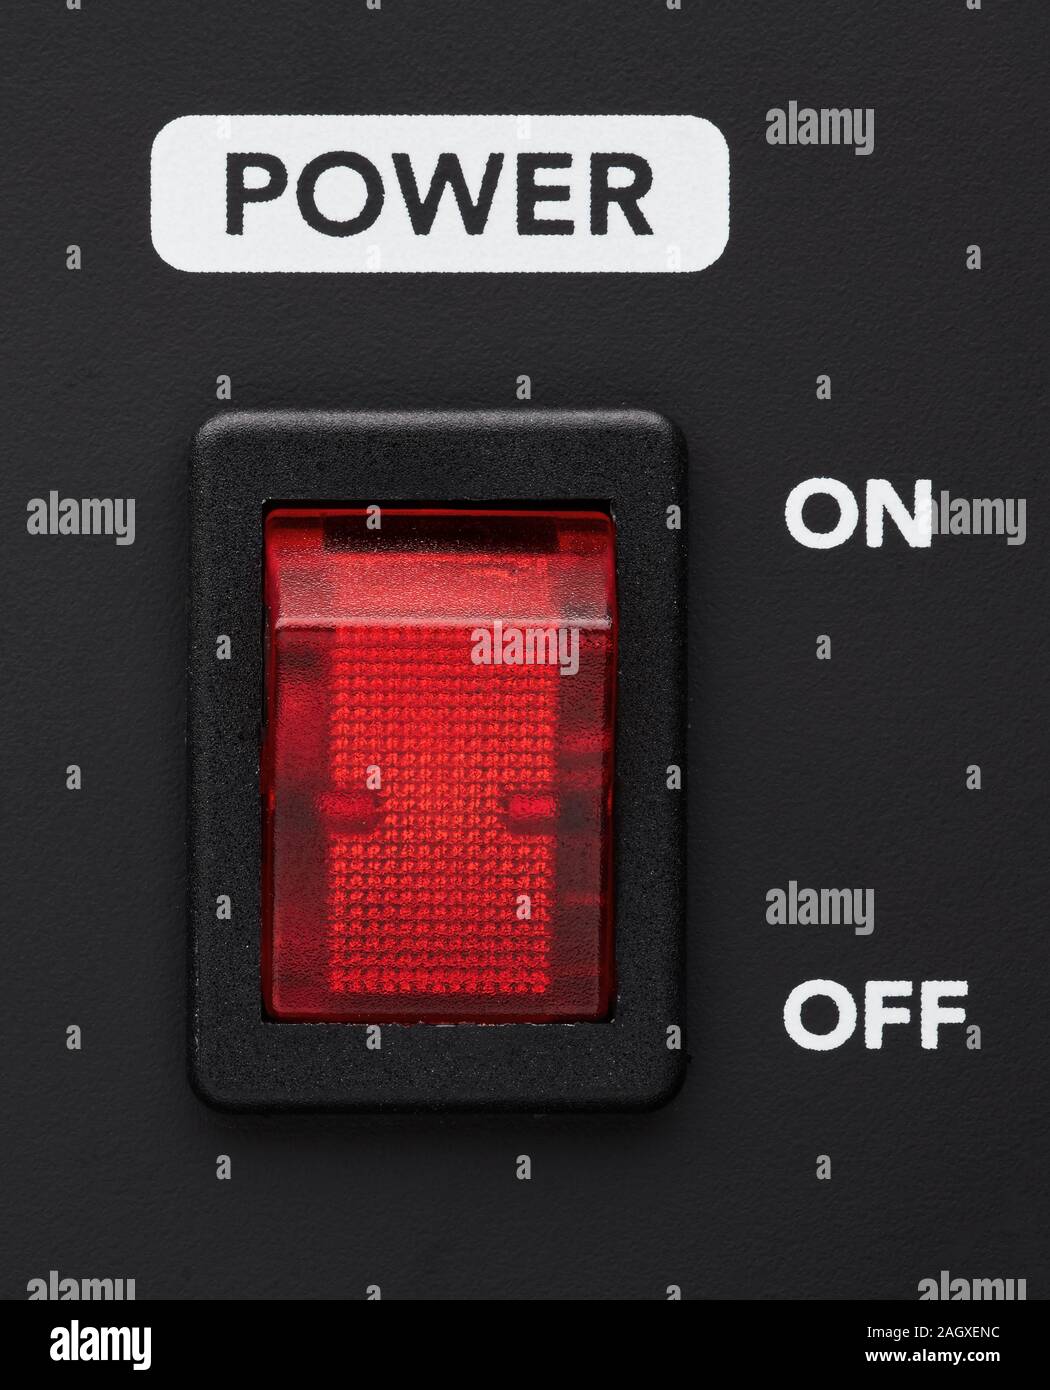 Power on and off electrical switch red button on black background. Close up detail. Stock Photo